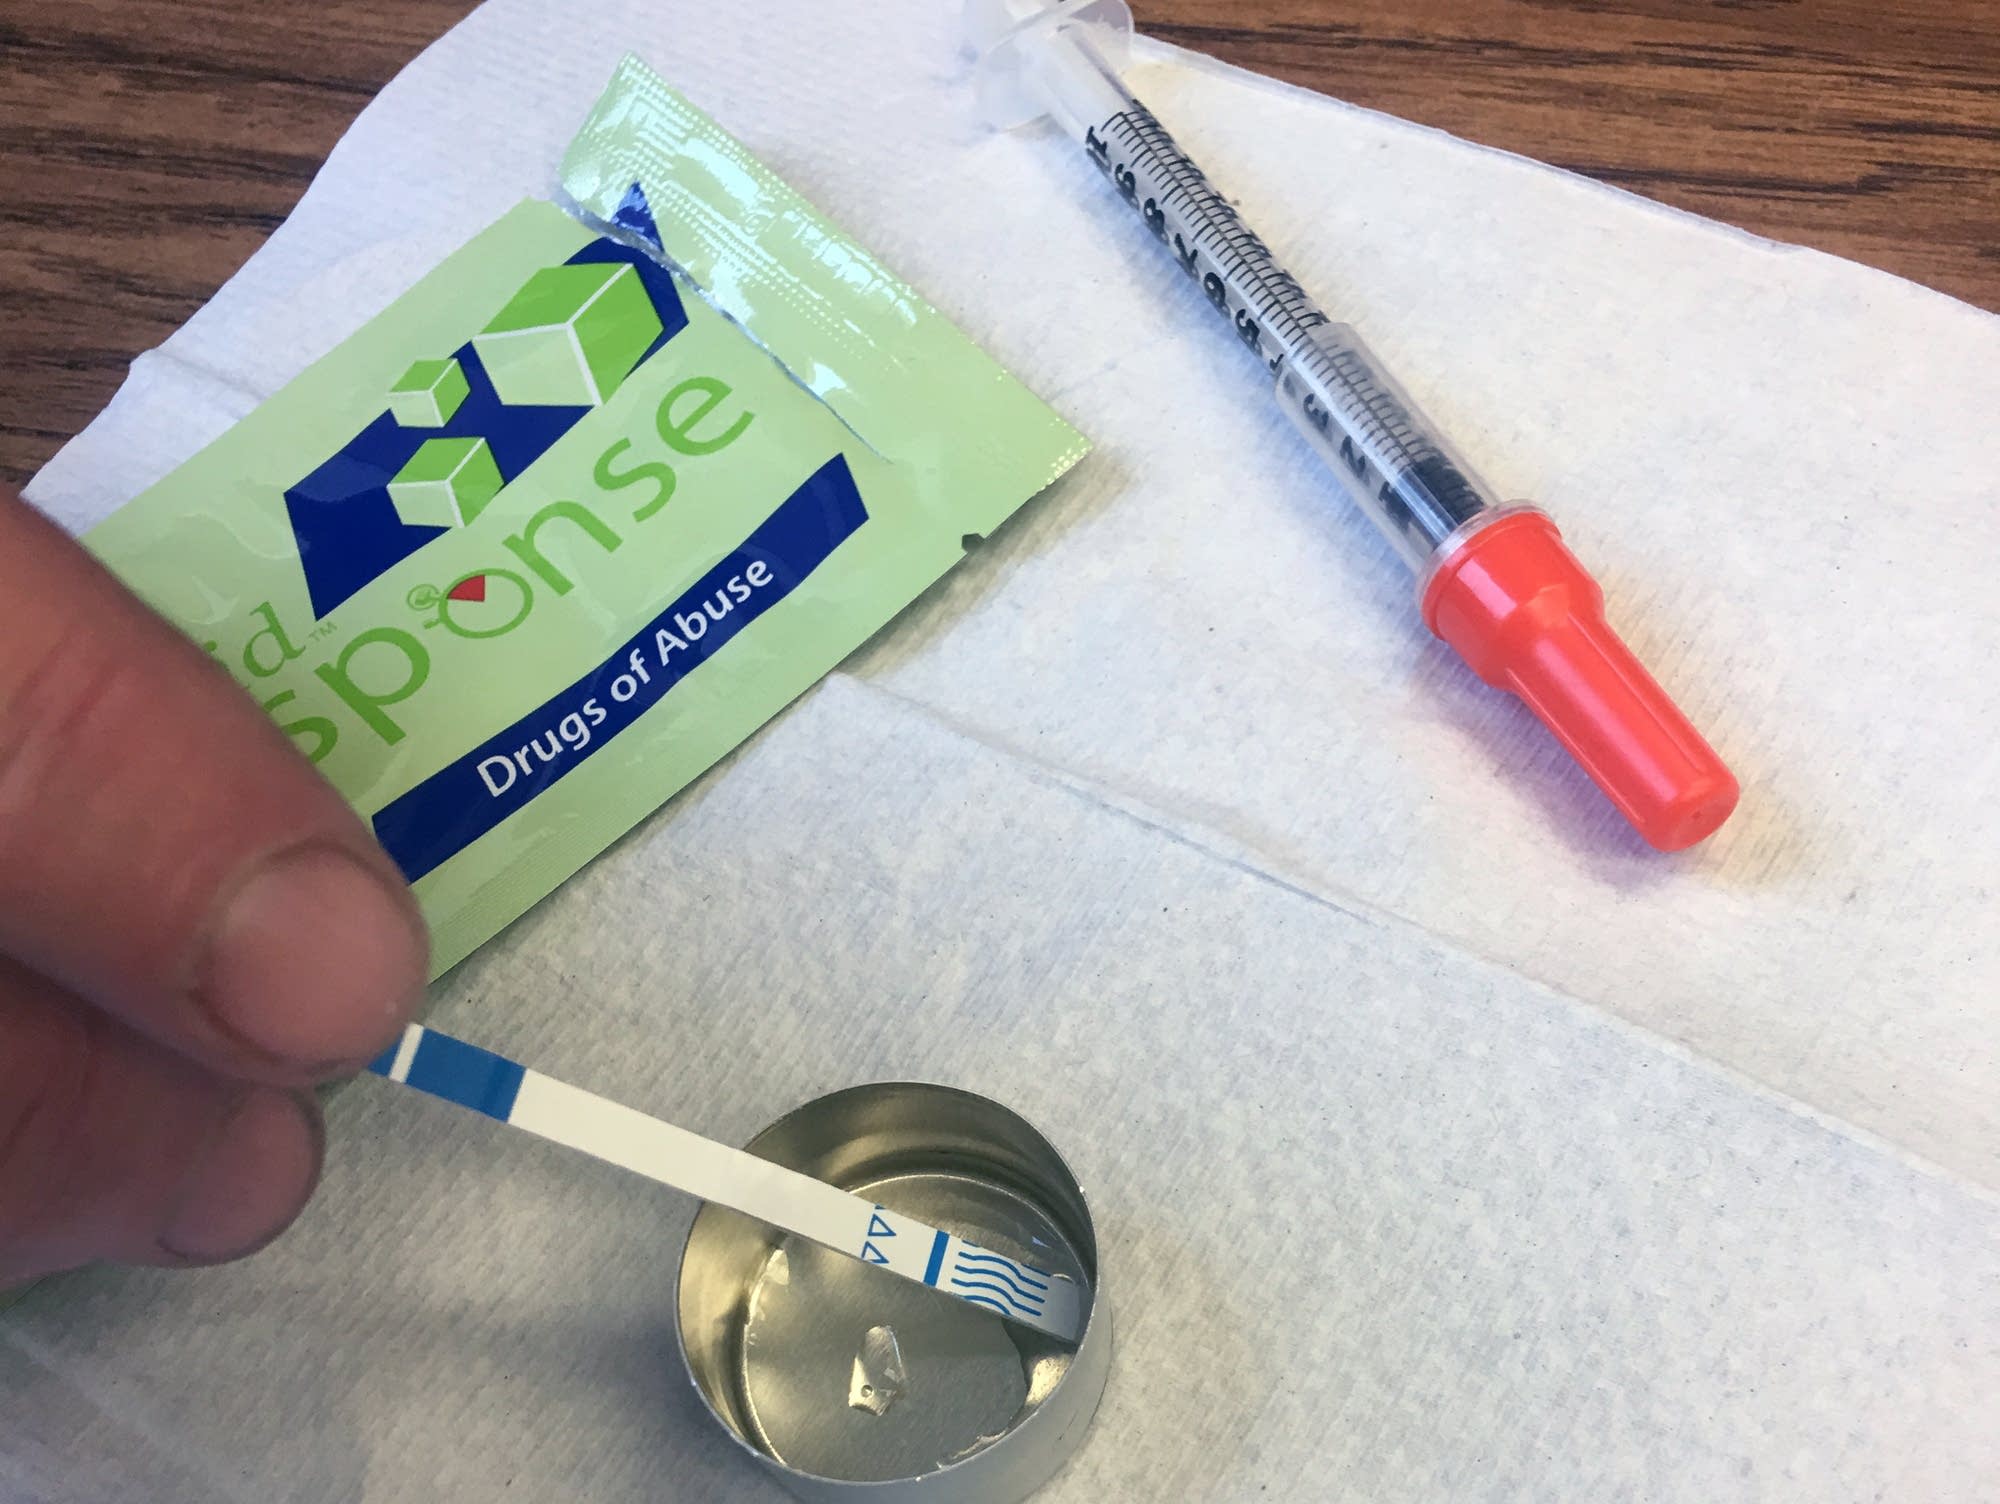 Just How Effective Are Fentanyl Test Strips?